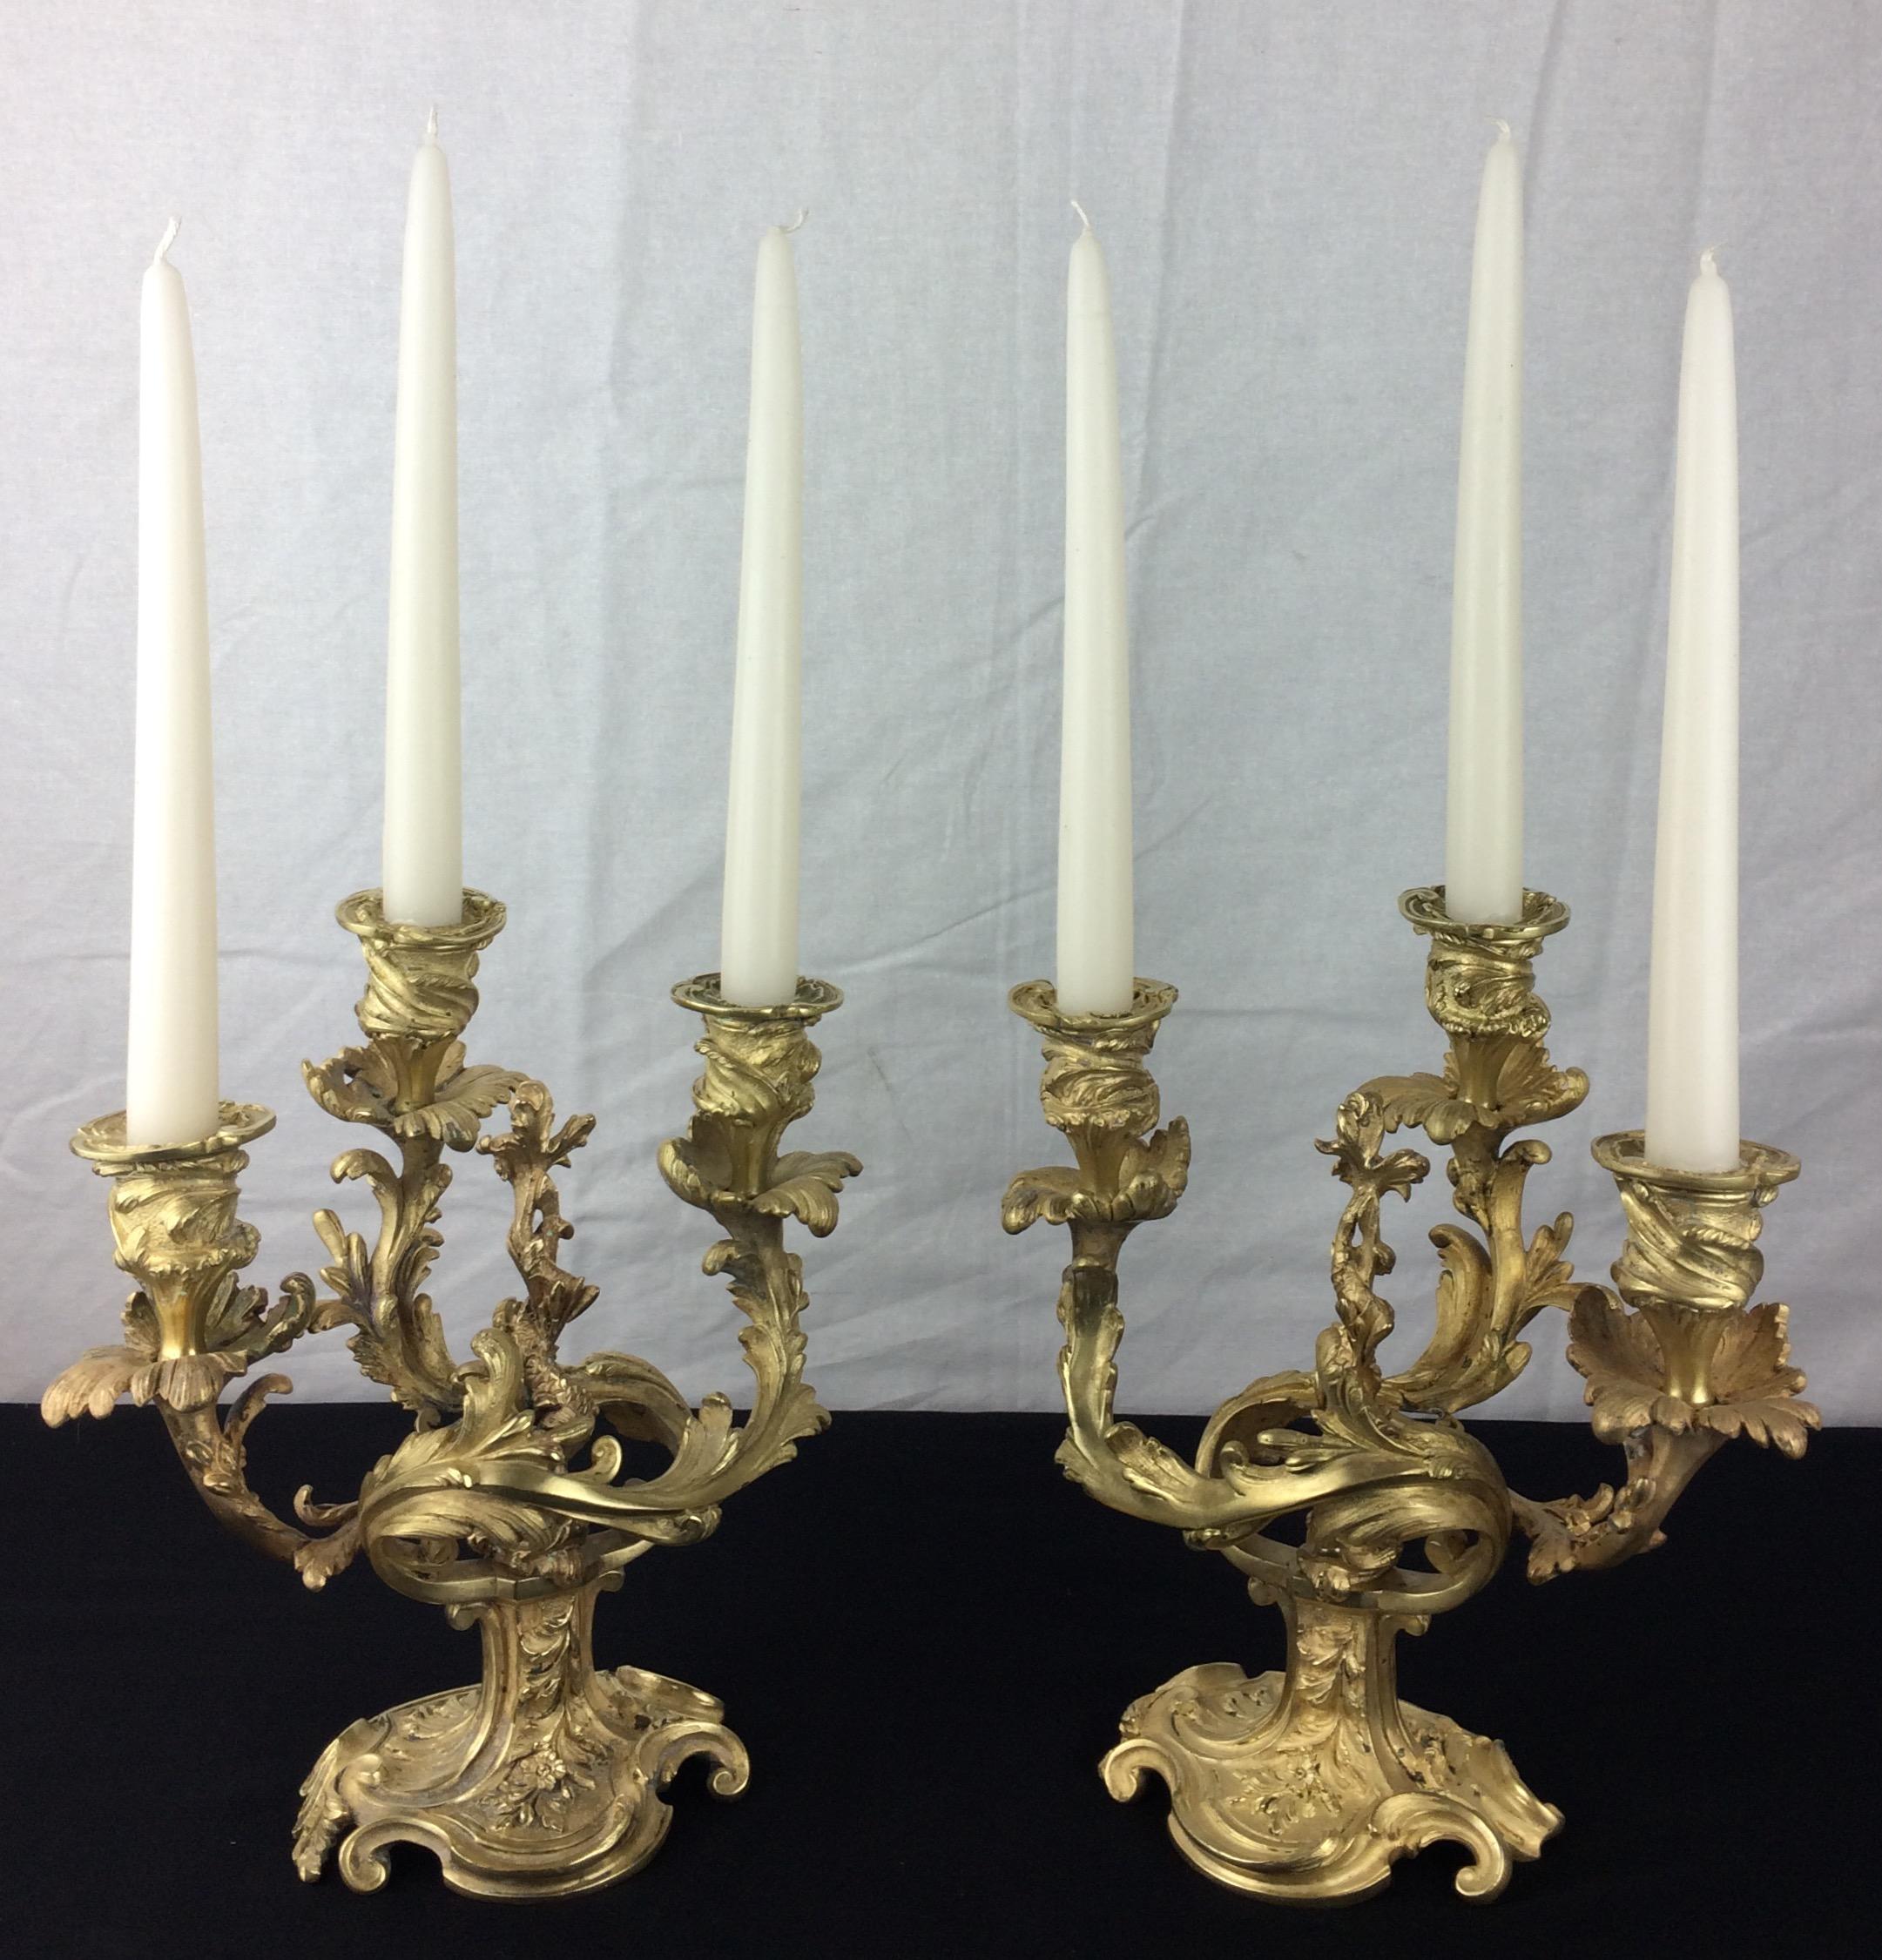 Pair of 19th Century French Gilt Bronze Candelabras, Napoleon III Style  For Sale 9